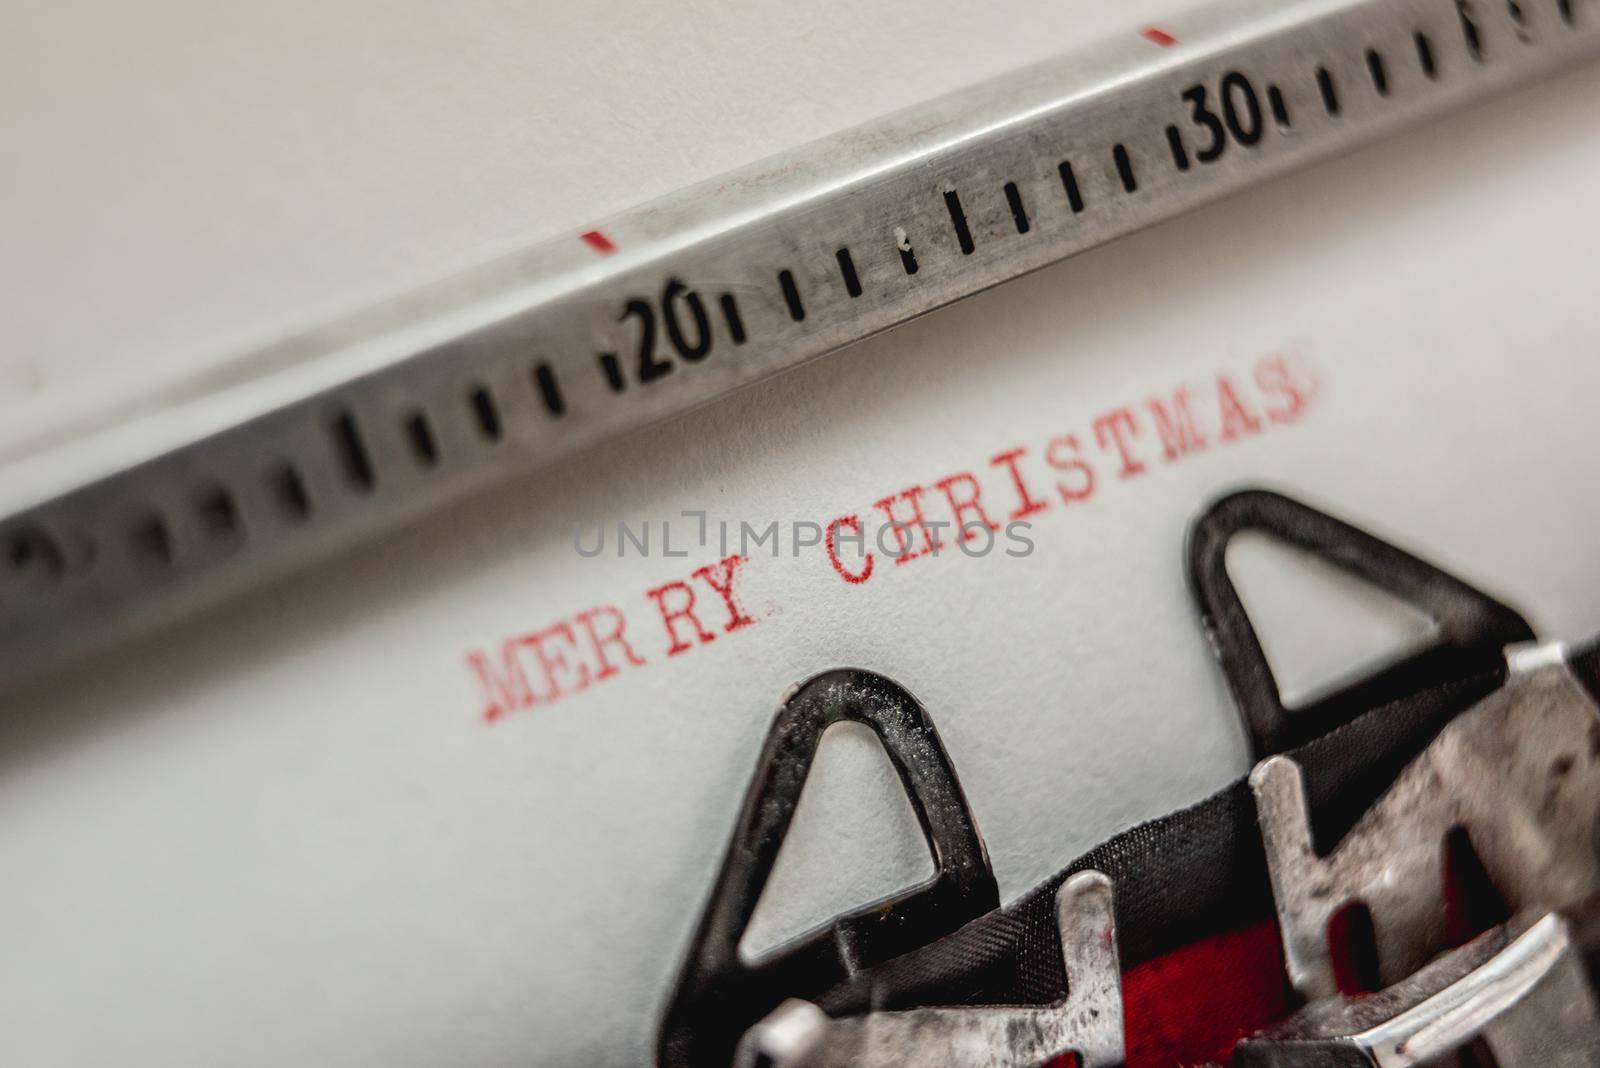 Text Merry Christmas printed with red inks on white paper on retro typewriter. Closeup view